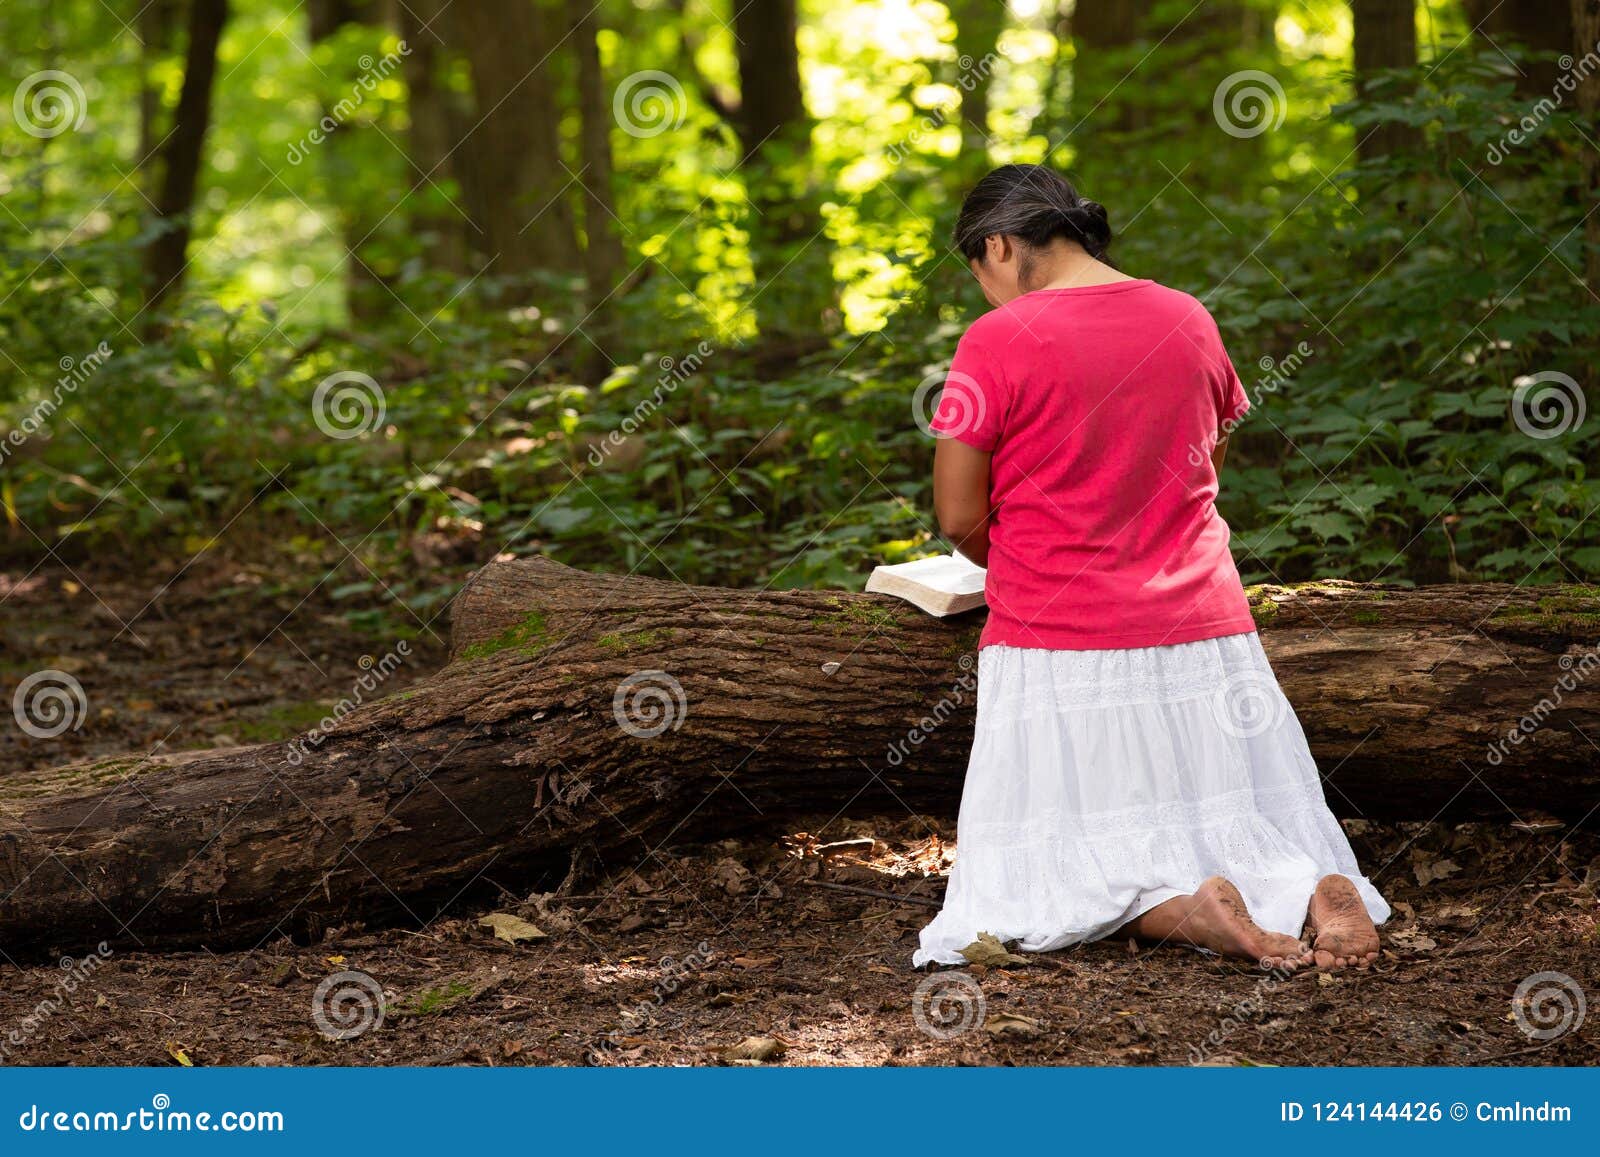 woman in forest preserve with bible kneeling in prayer